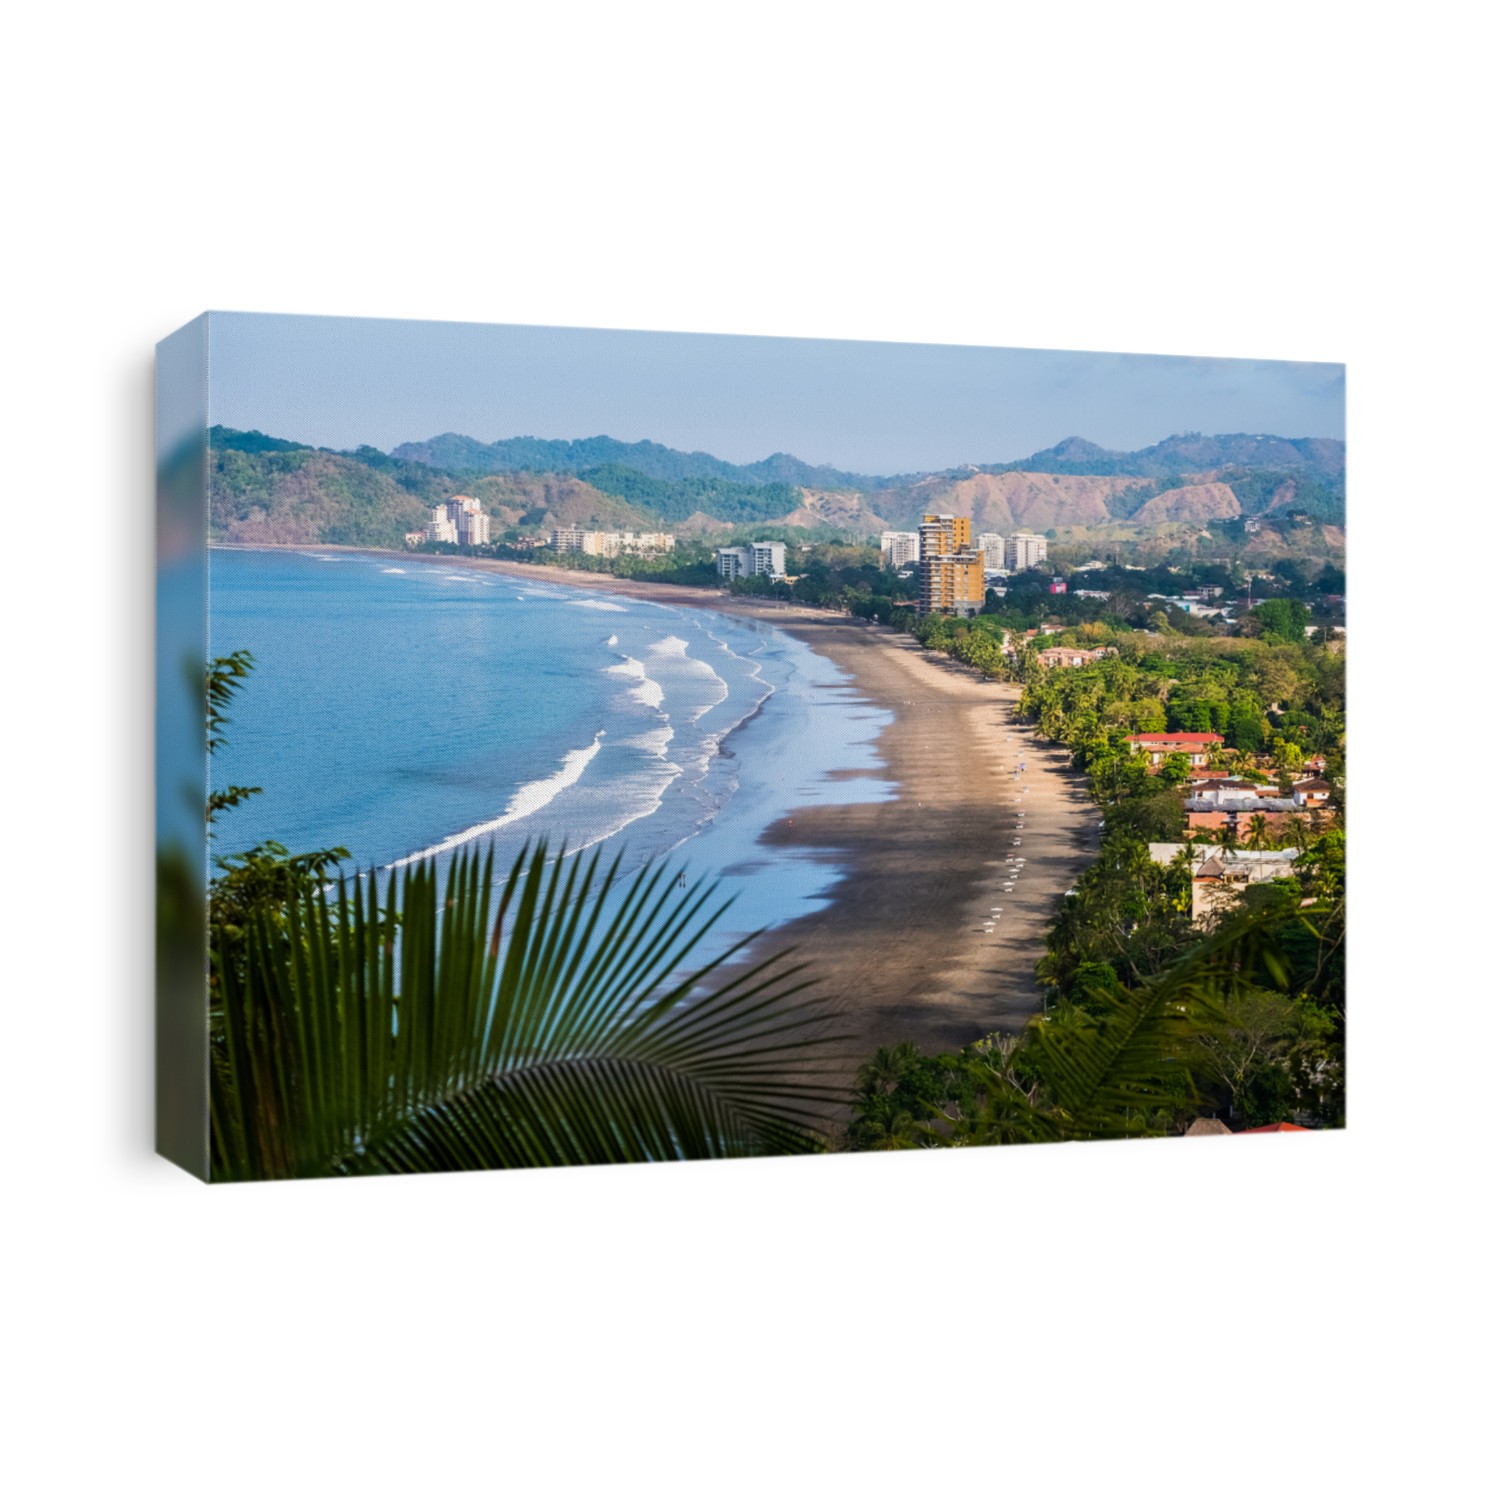 Tropical wide sandy beach of the town of Jaco, Costa Rica